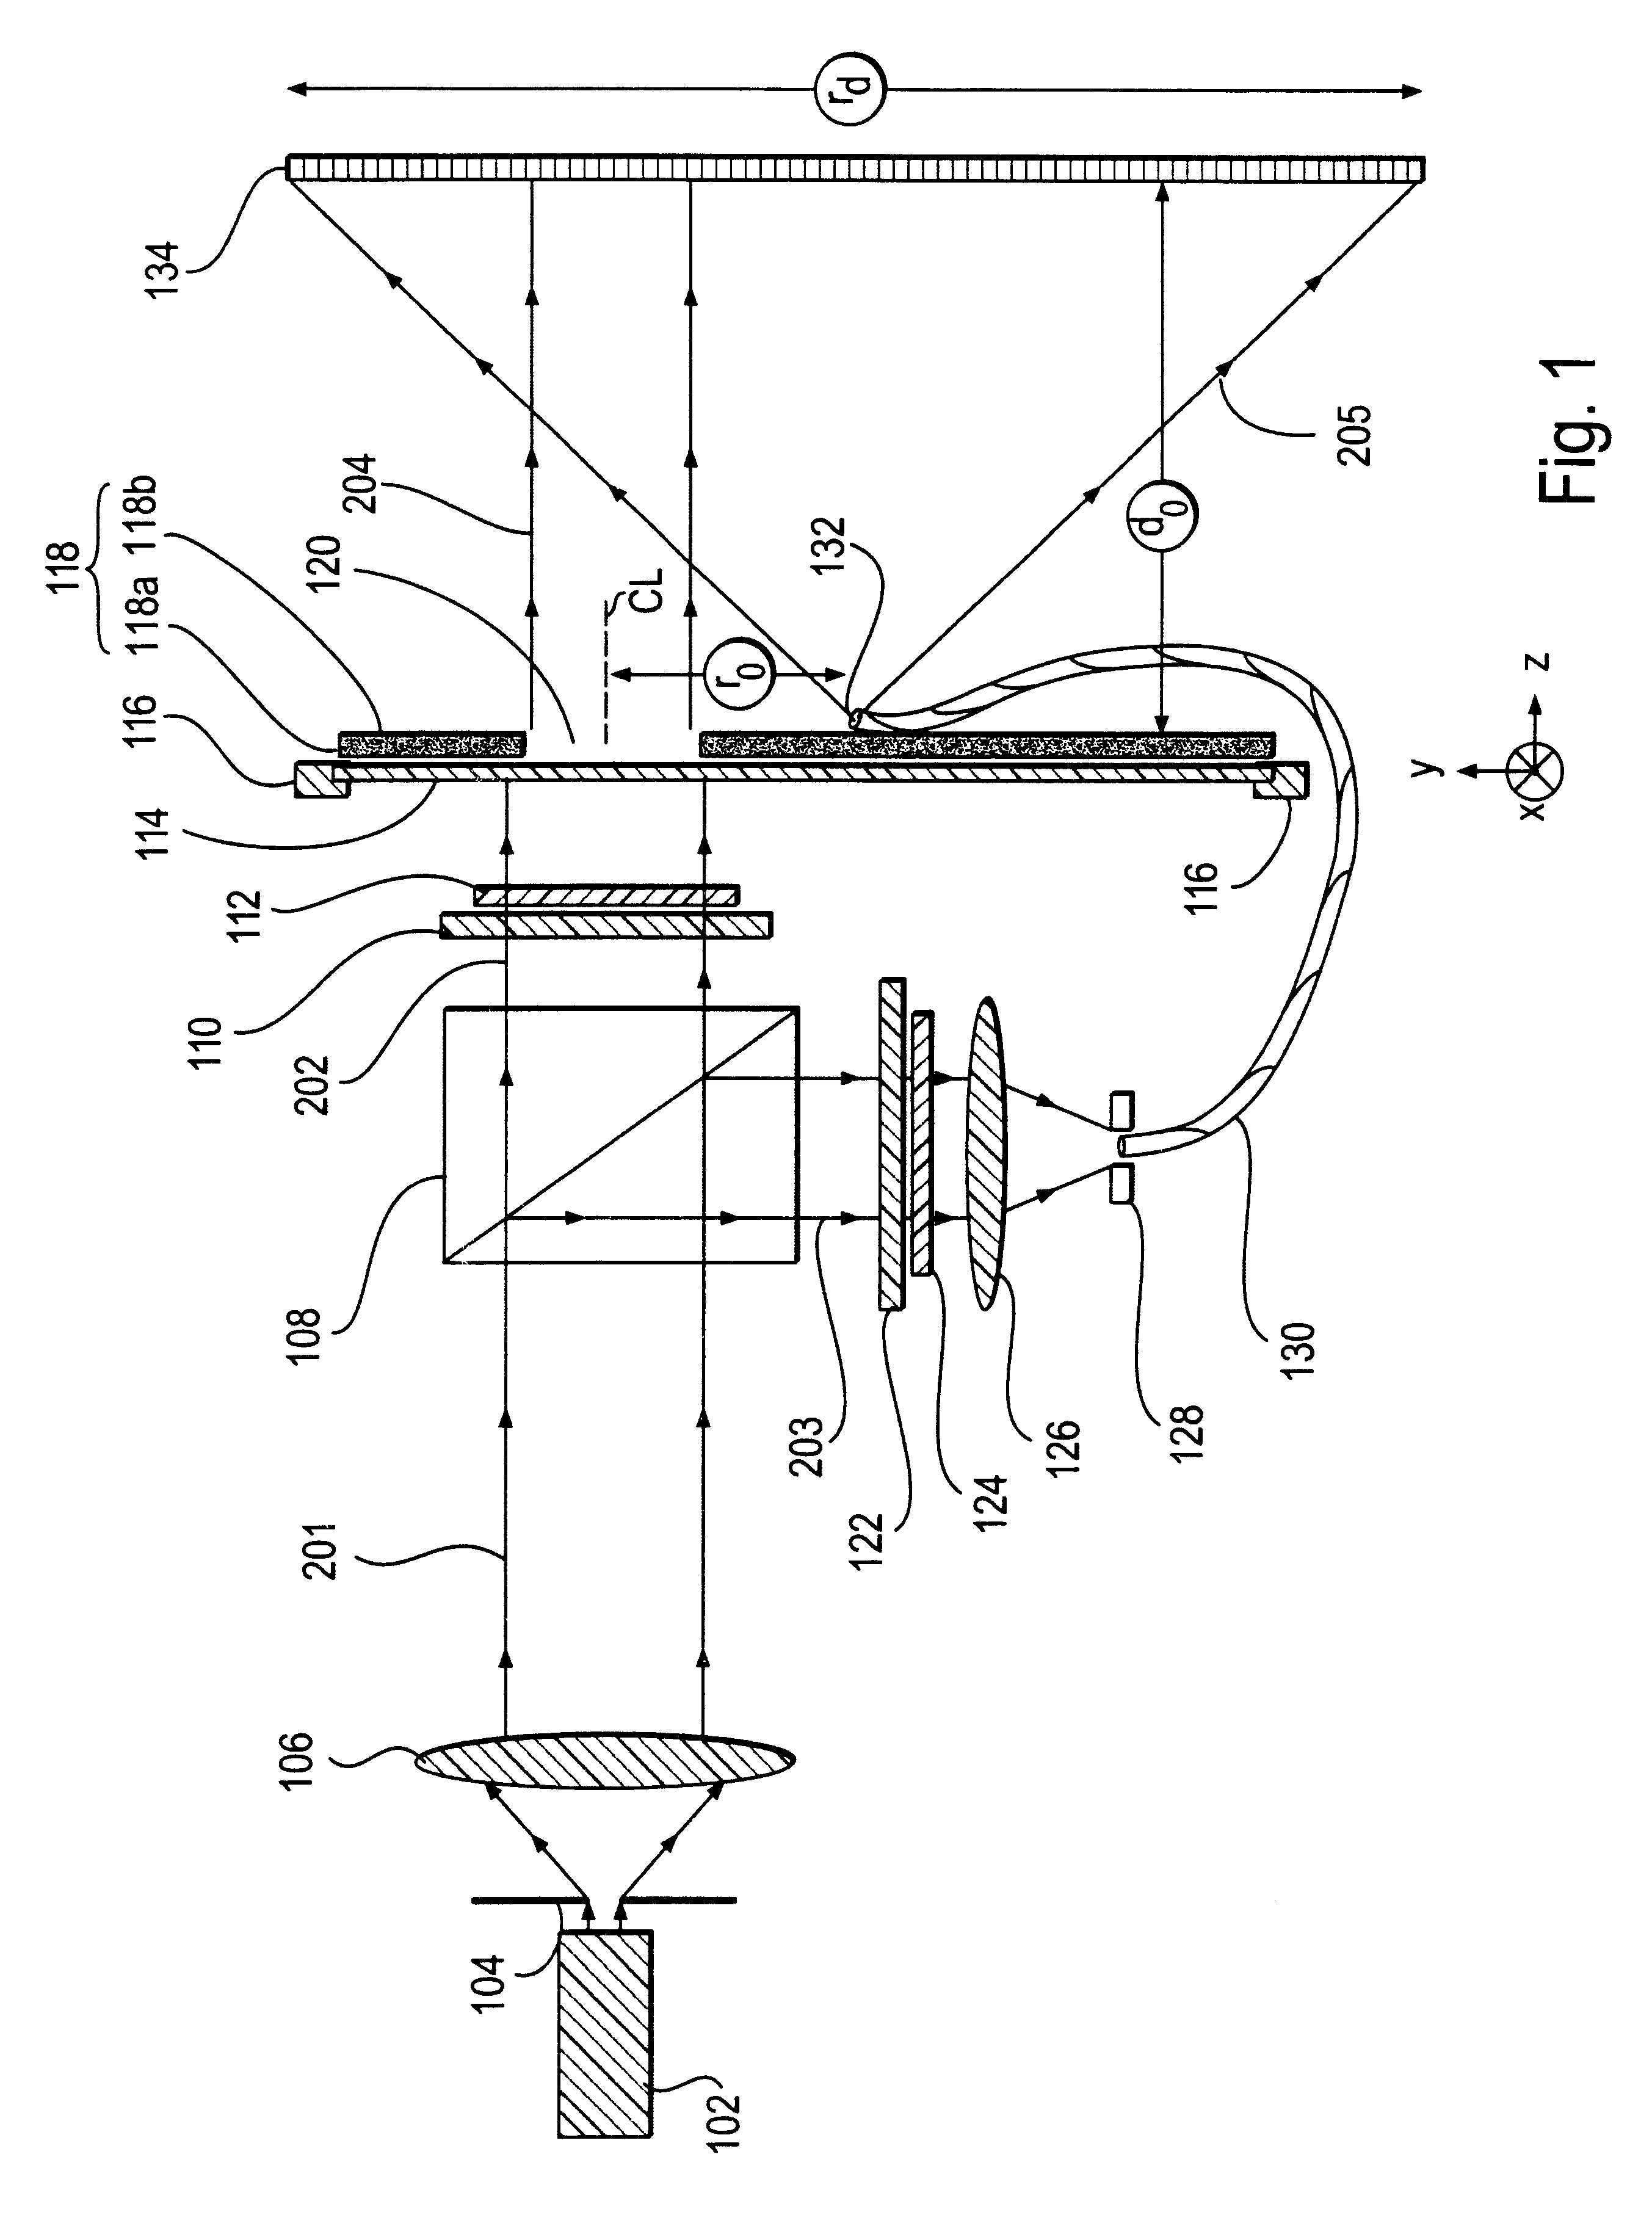 Point diffraction interferometric mask inspection tool and method